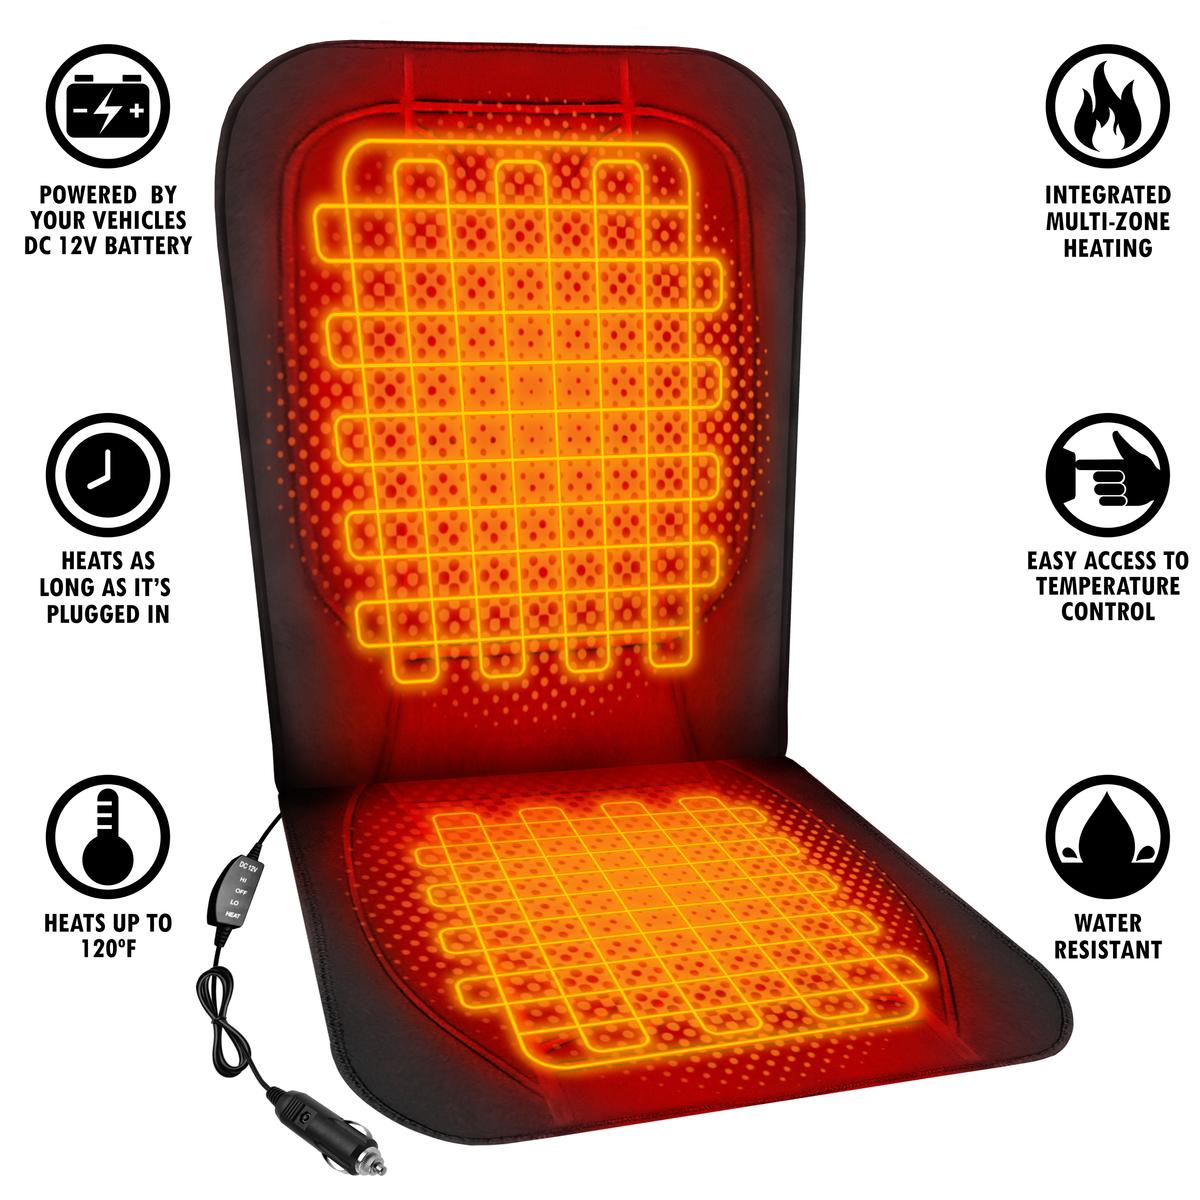 Seat Heater 12v – Luxe Auto